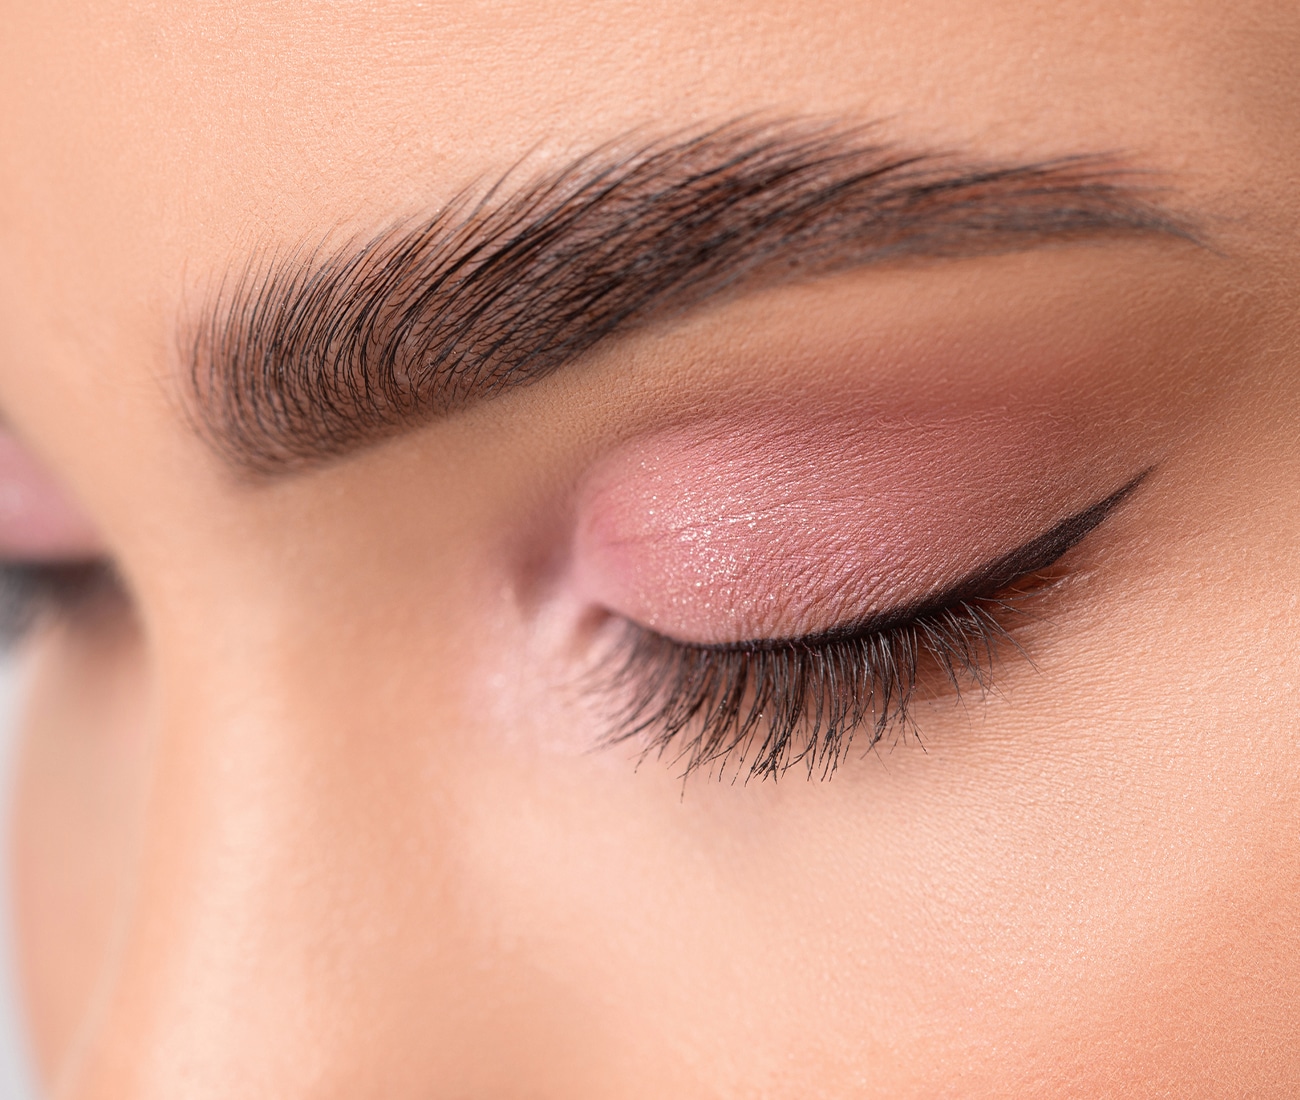 A Close Up Of Woman's Eye Makeup And Eyebrow